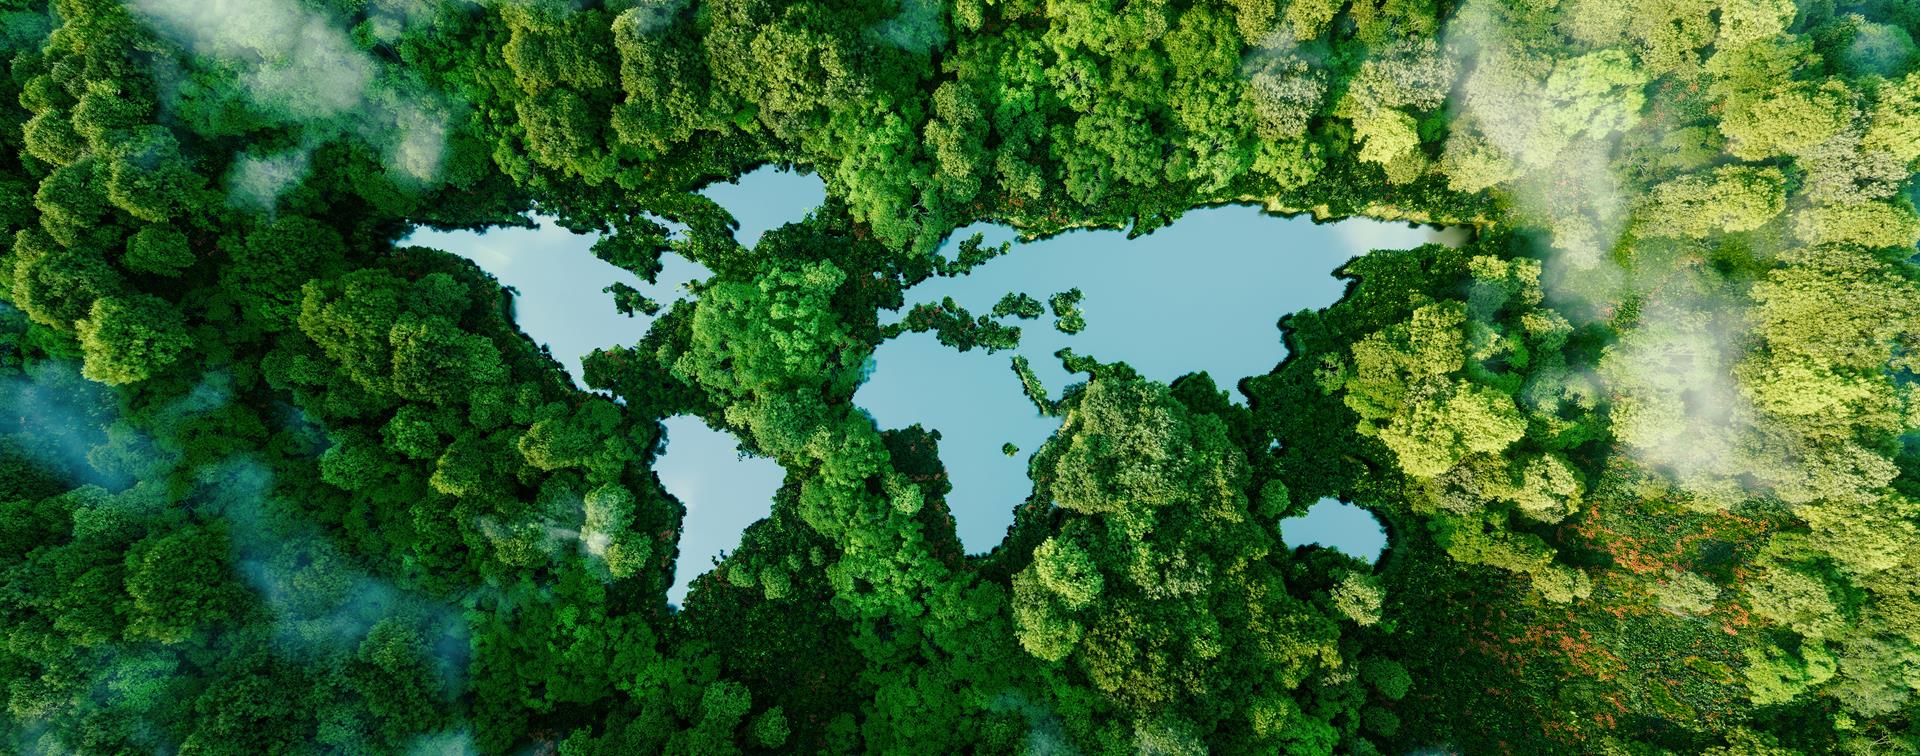 Photo illustration of a world map depicted by water and trees